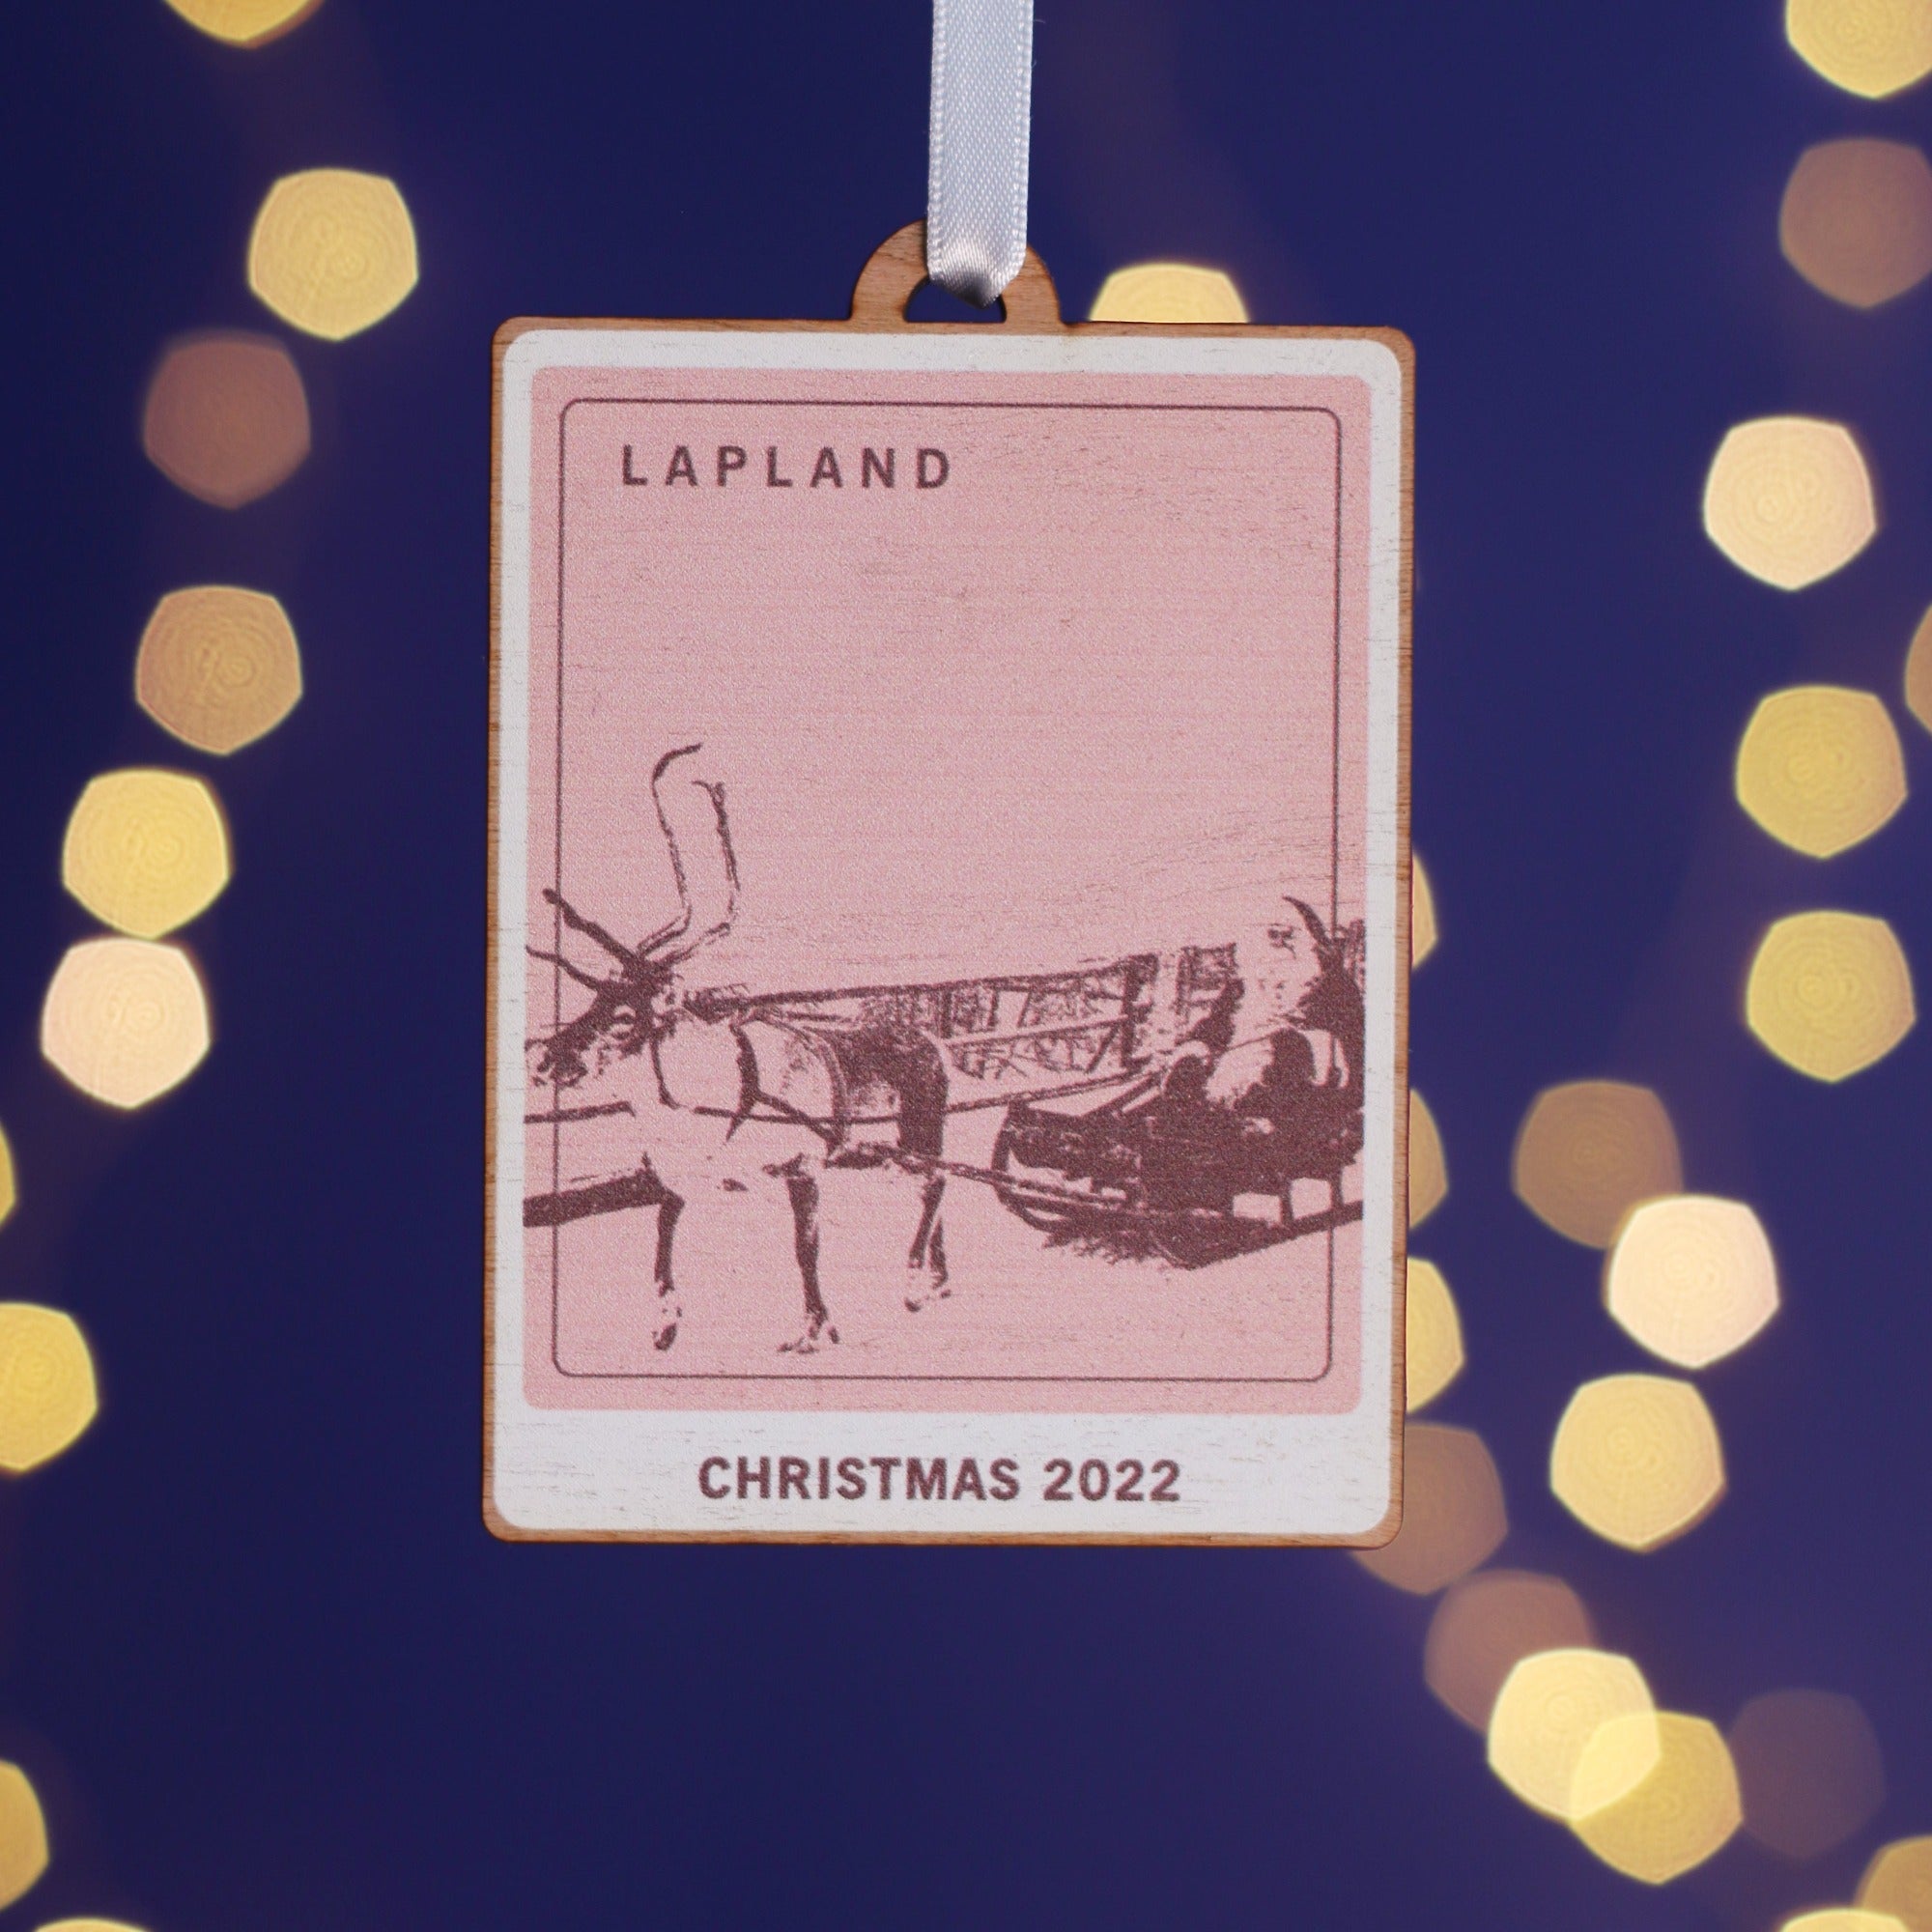 Wooden Christmas decoration with a picture representing Lapland printed on it.